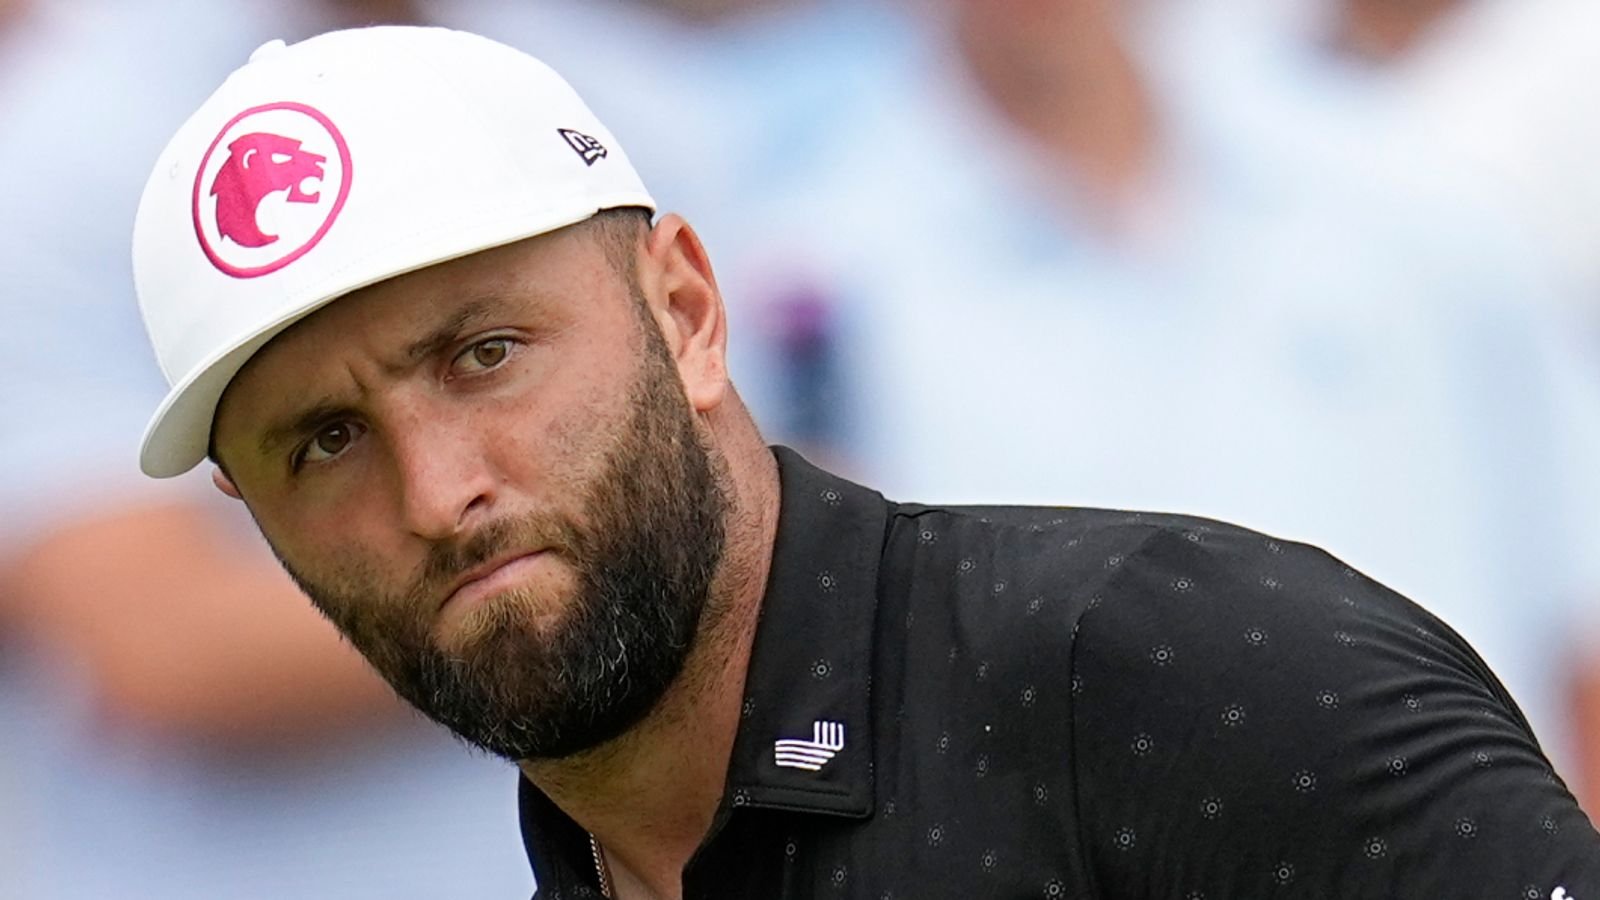 Jon Rahm a US Open doubt due to LIV Golf withdrawal due to foot injury | Golf News